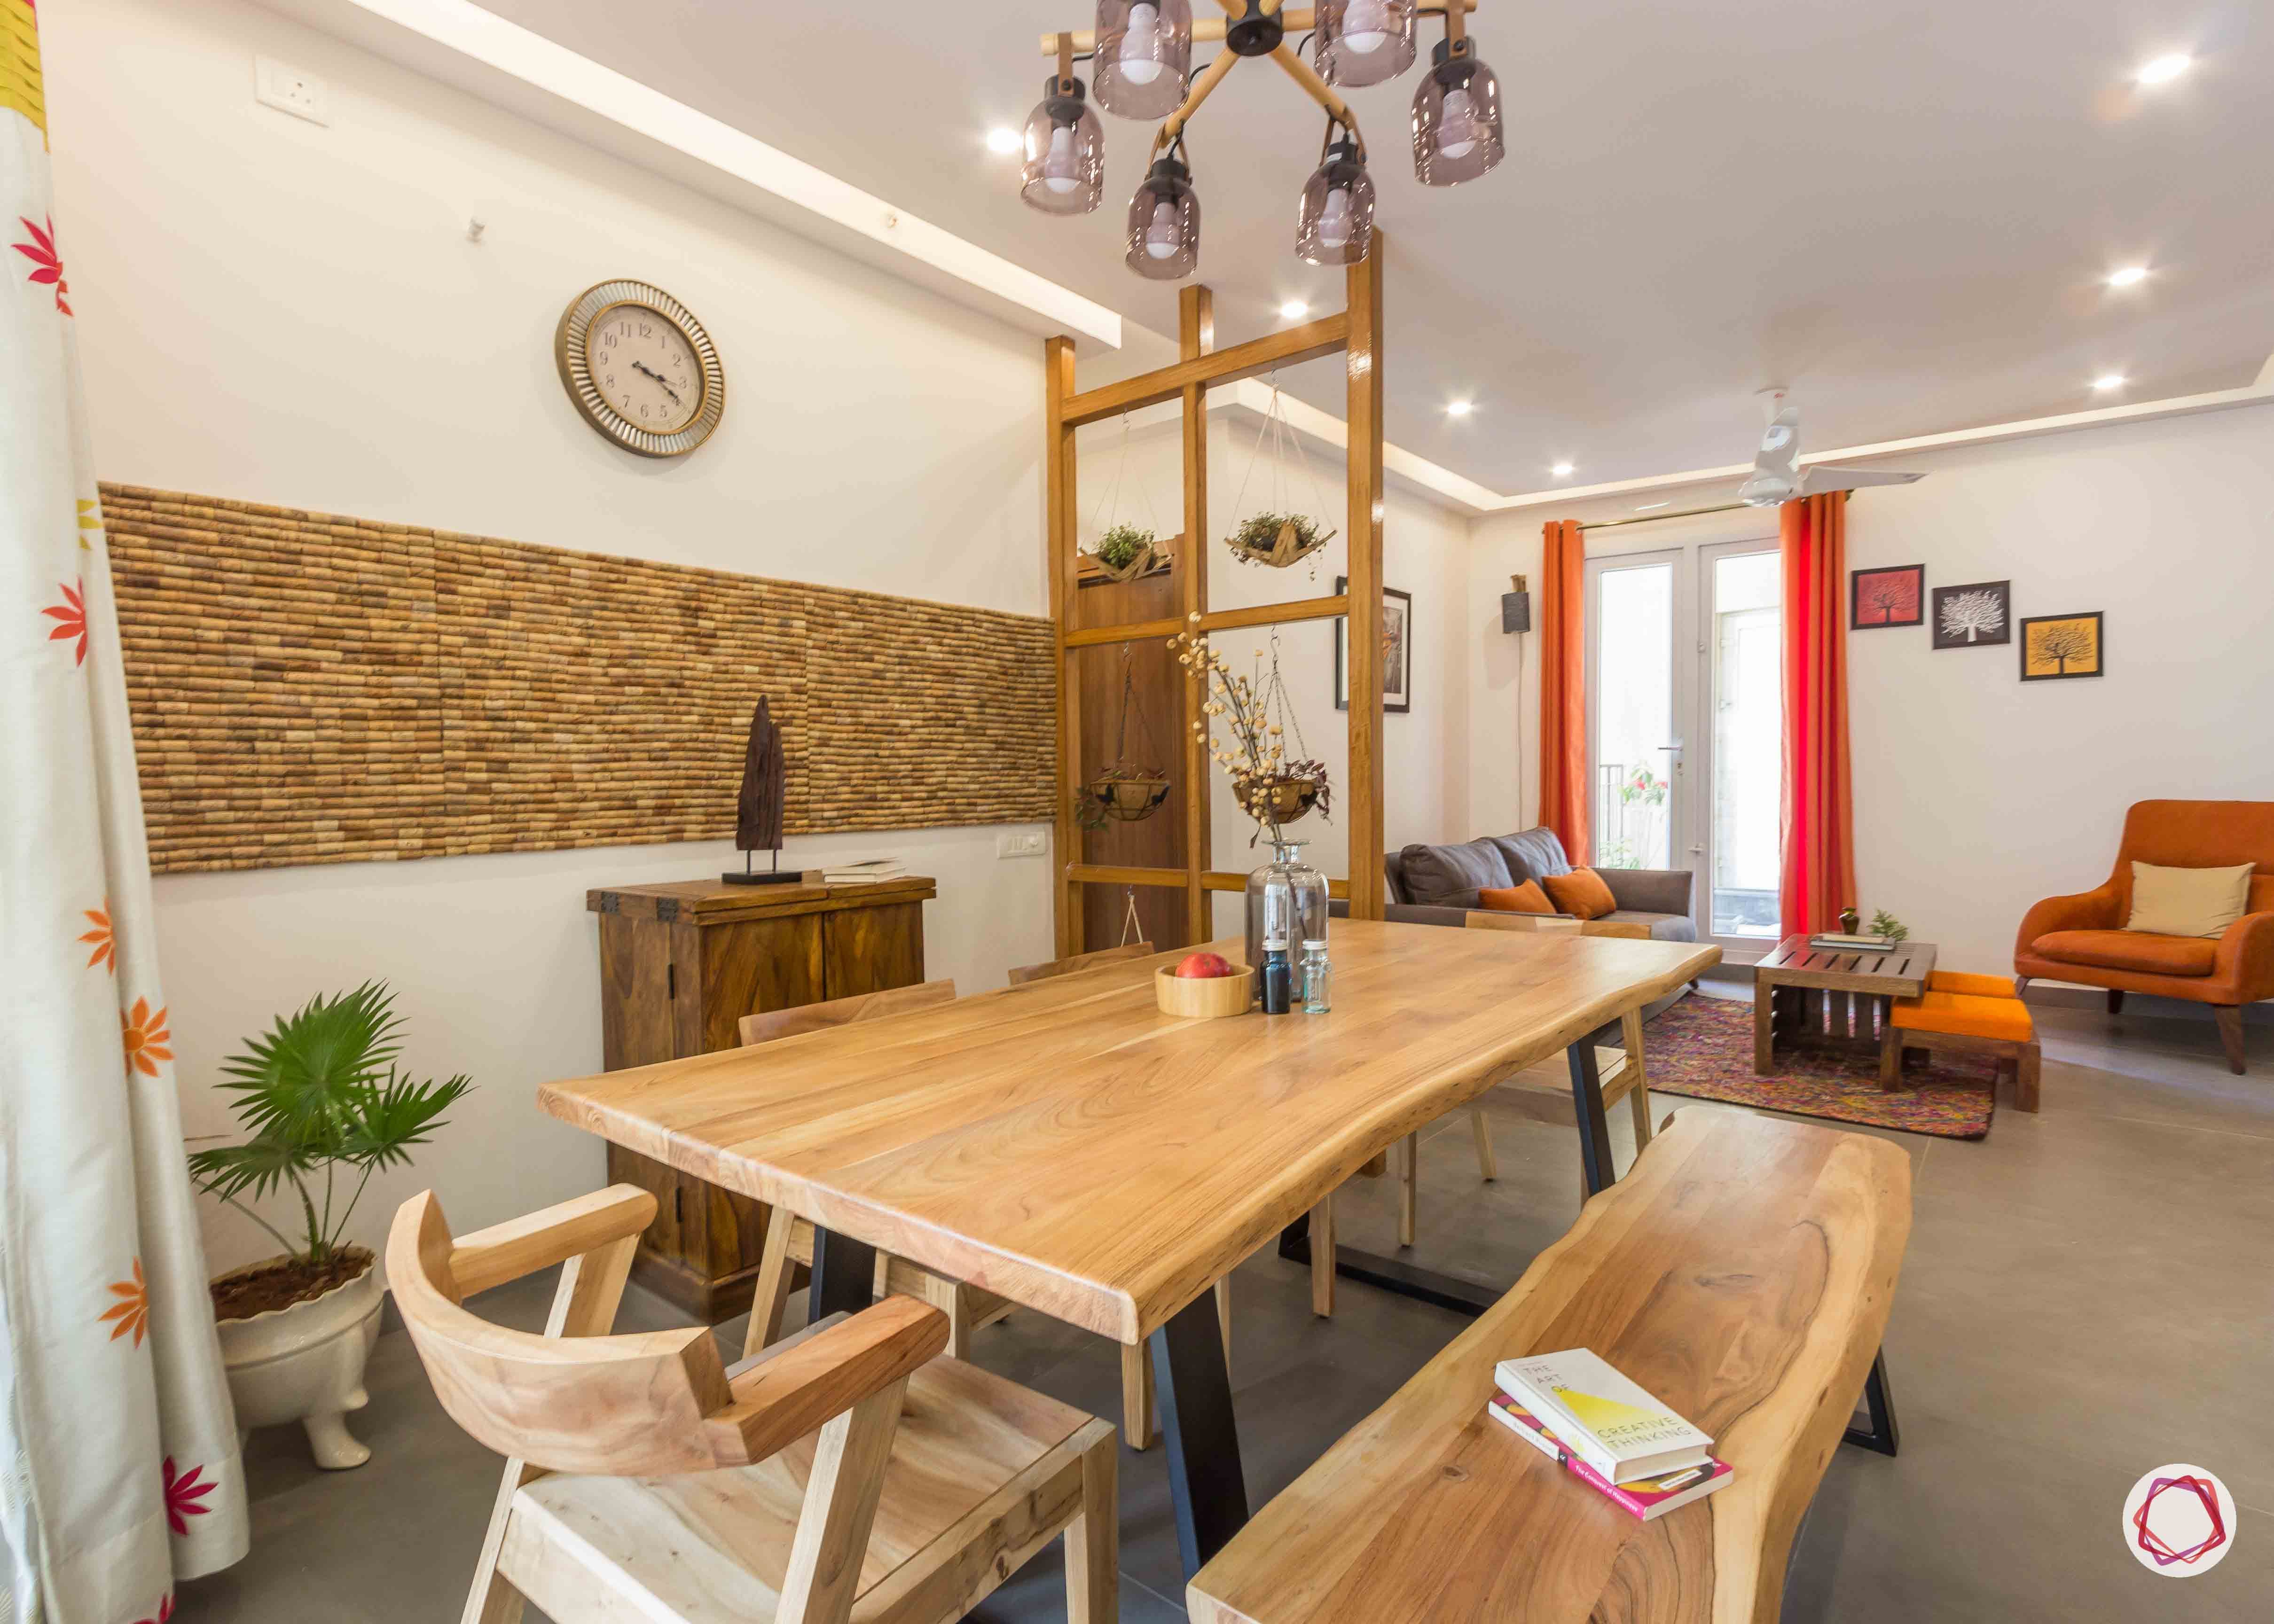 Best interior designers in bangalore_dining room-industrial-wooden-bench